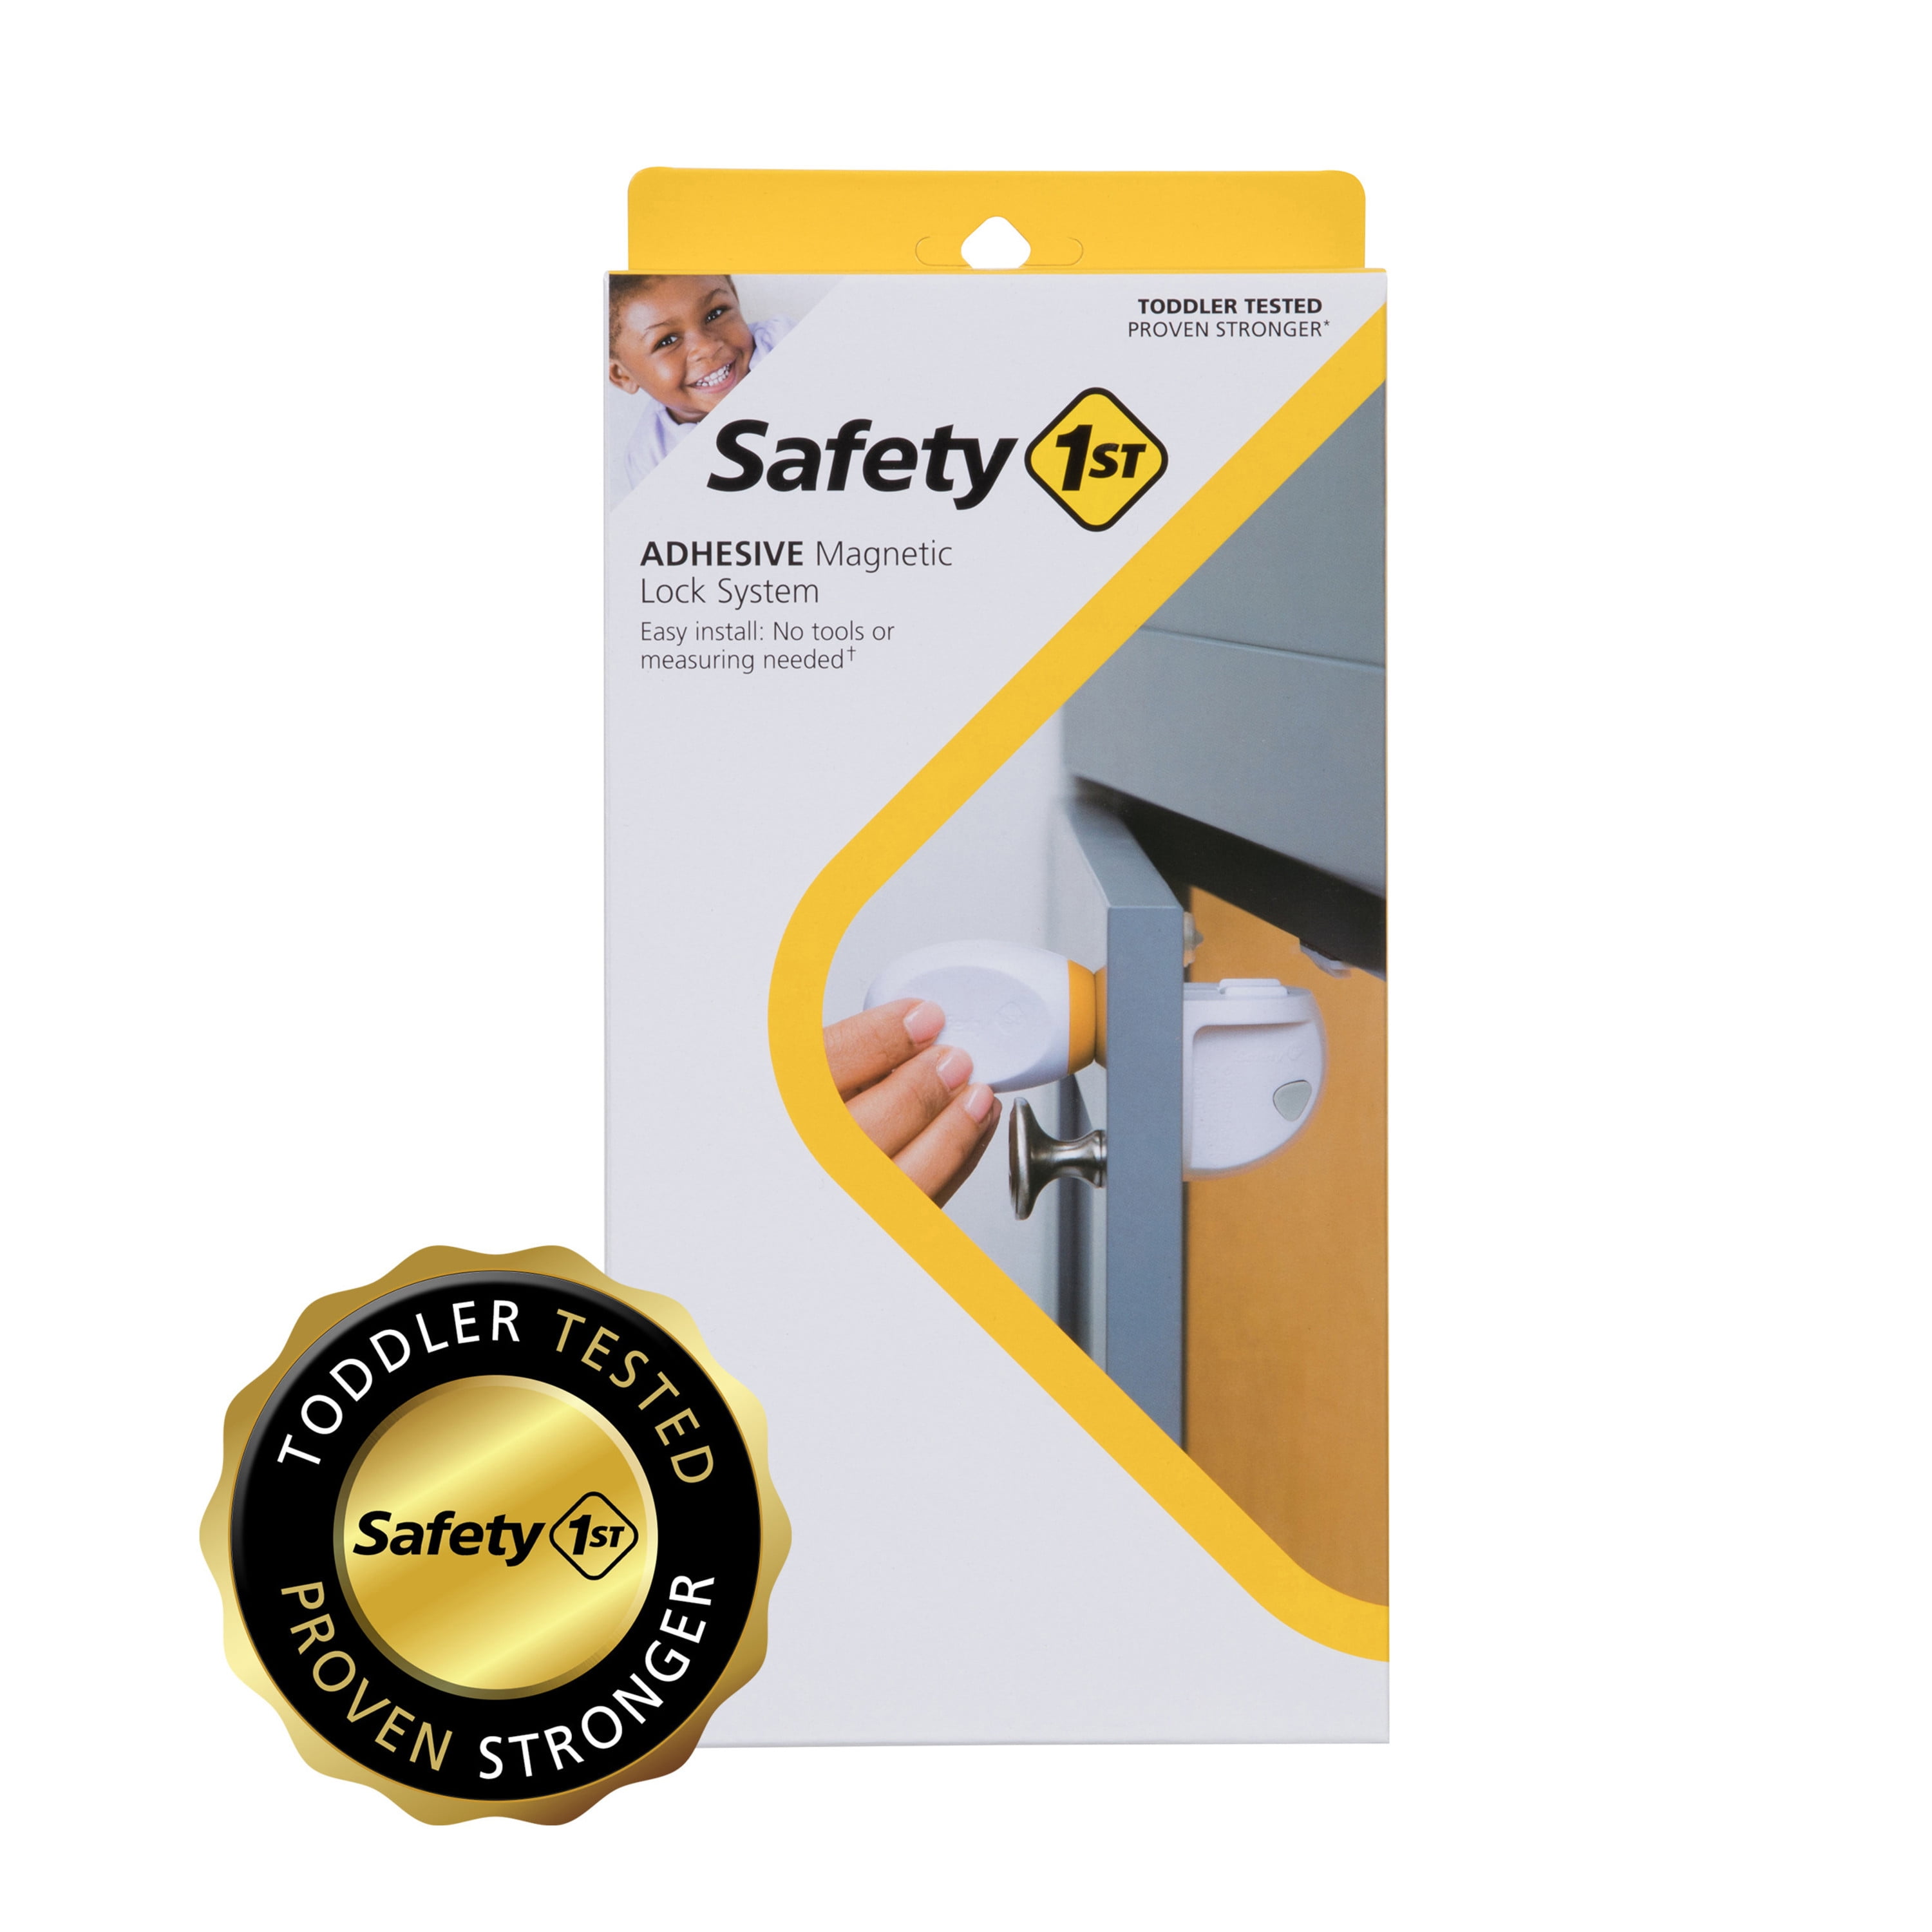 Safety 1st HS132 (HS1320500) Complete Magnetic Locking System for